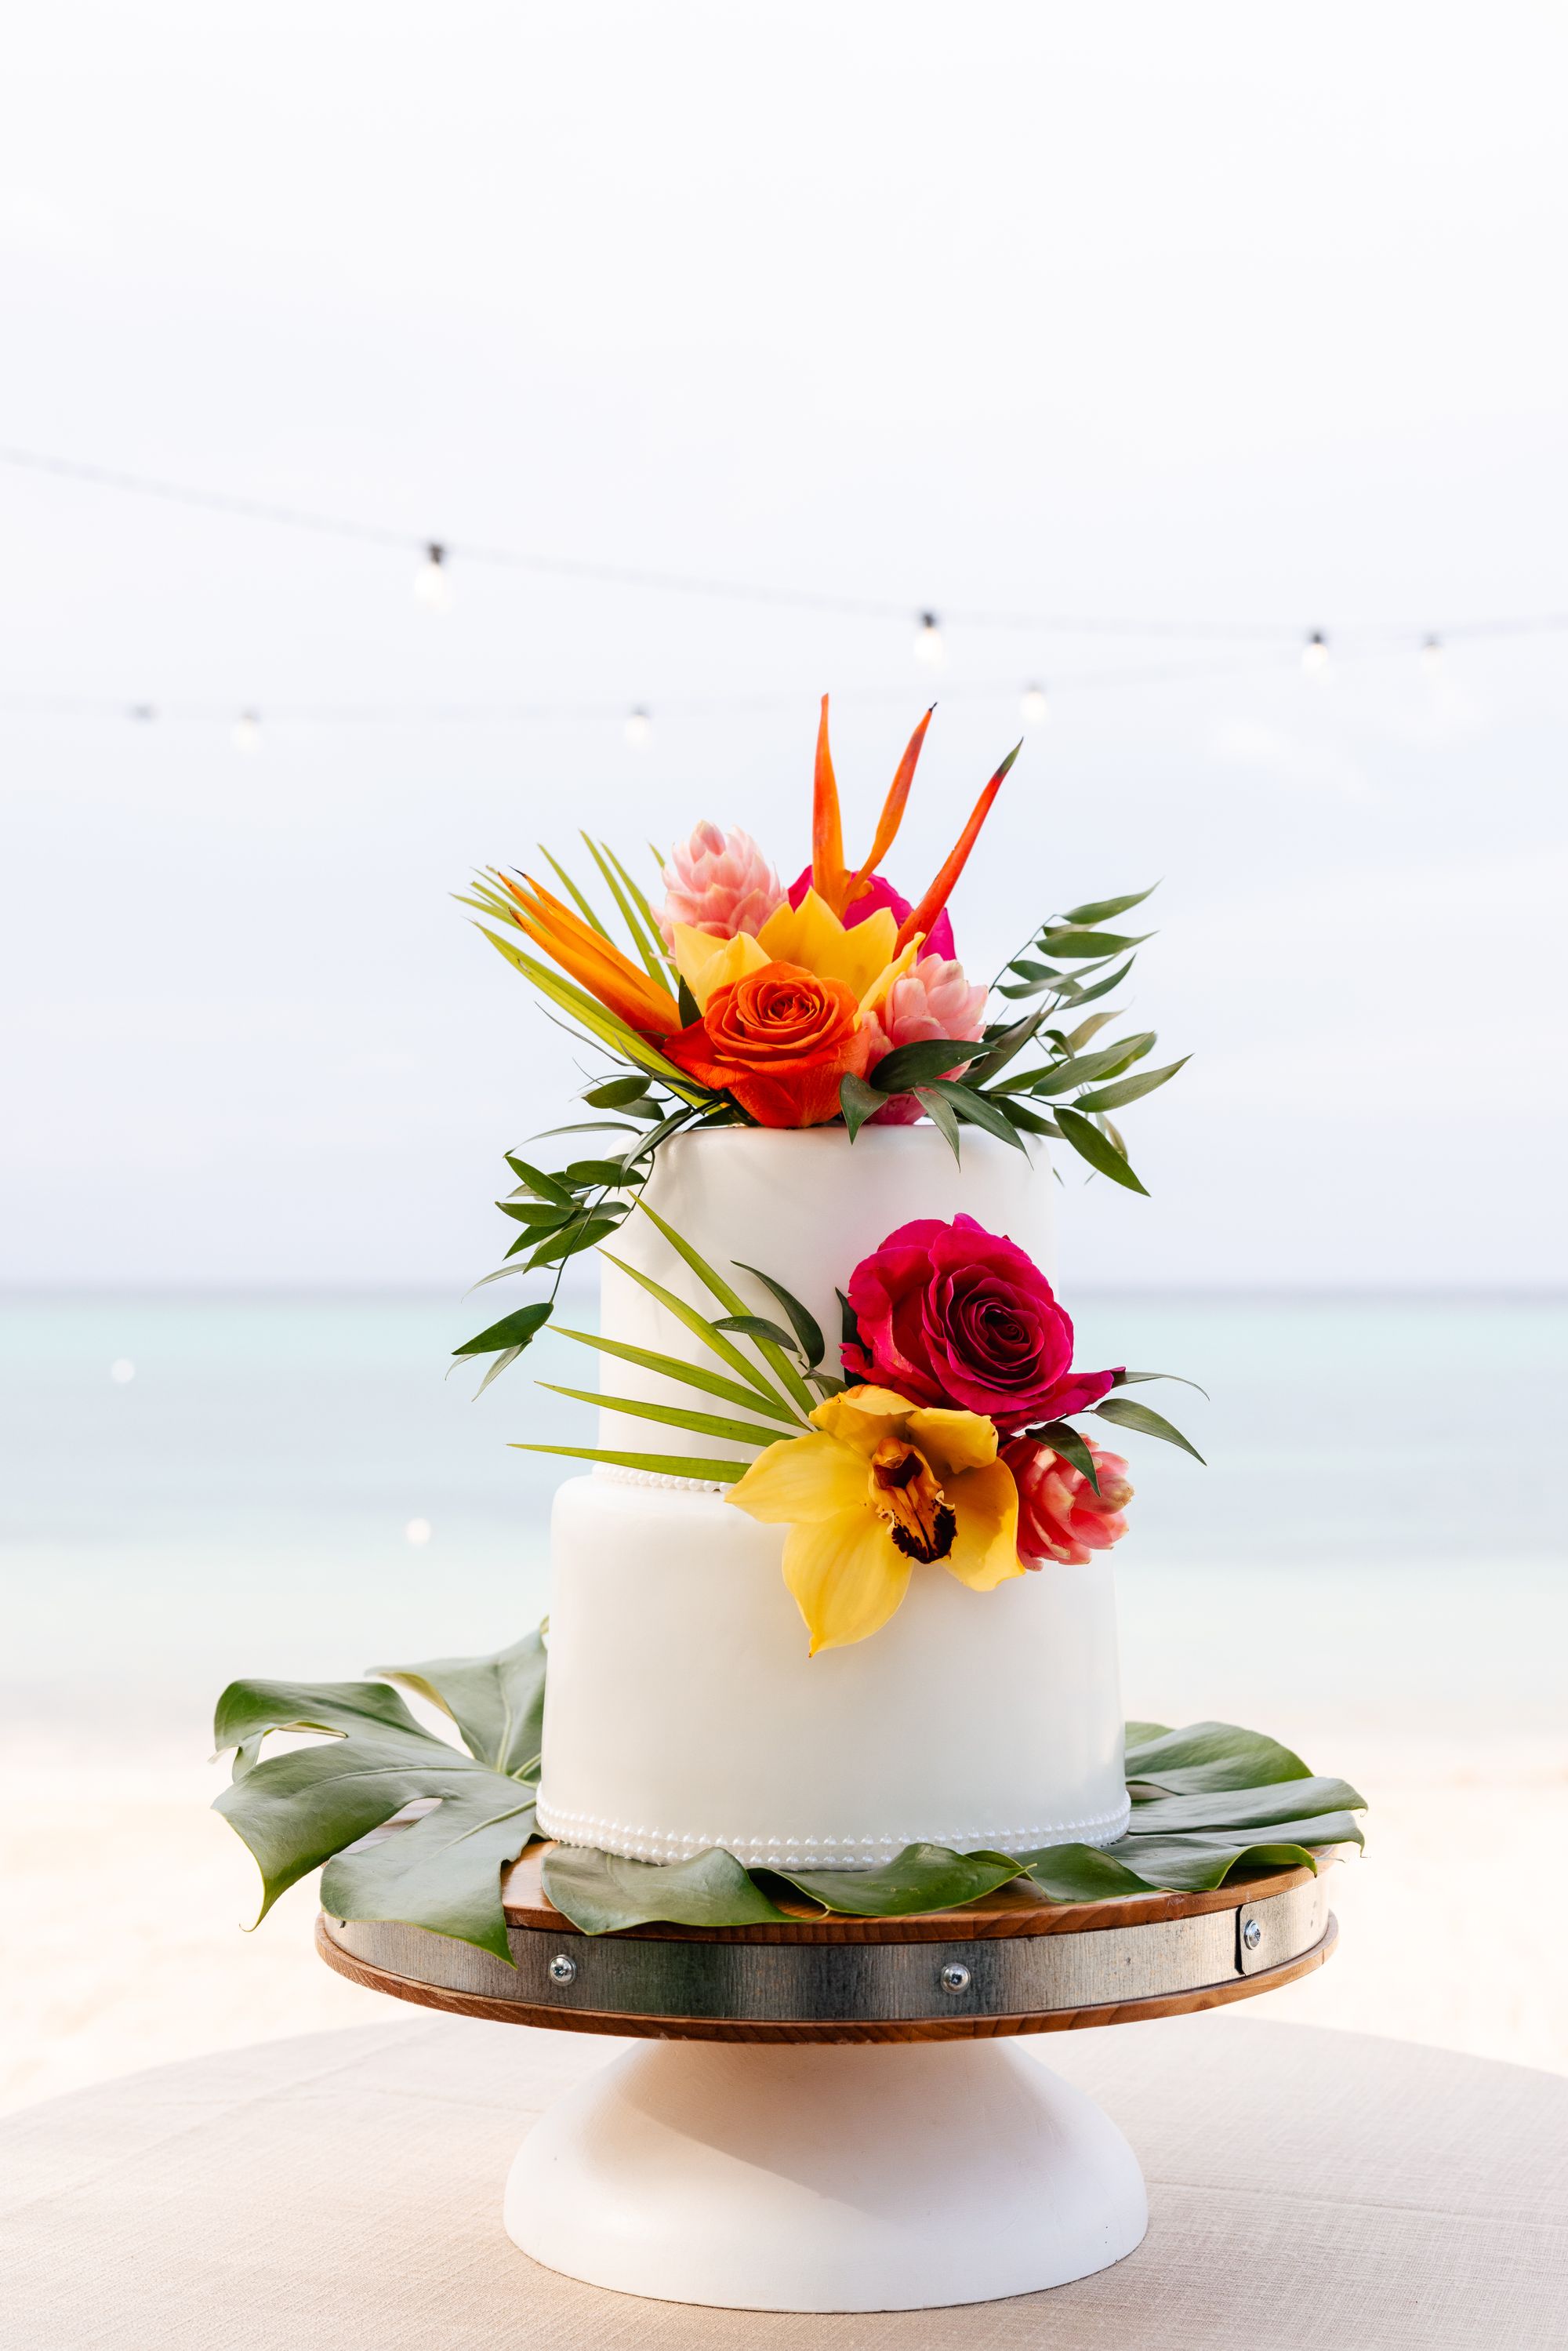 wedding cake created by the Sandals culinary team